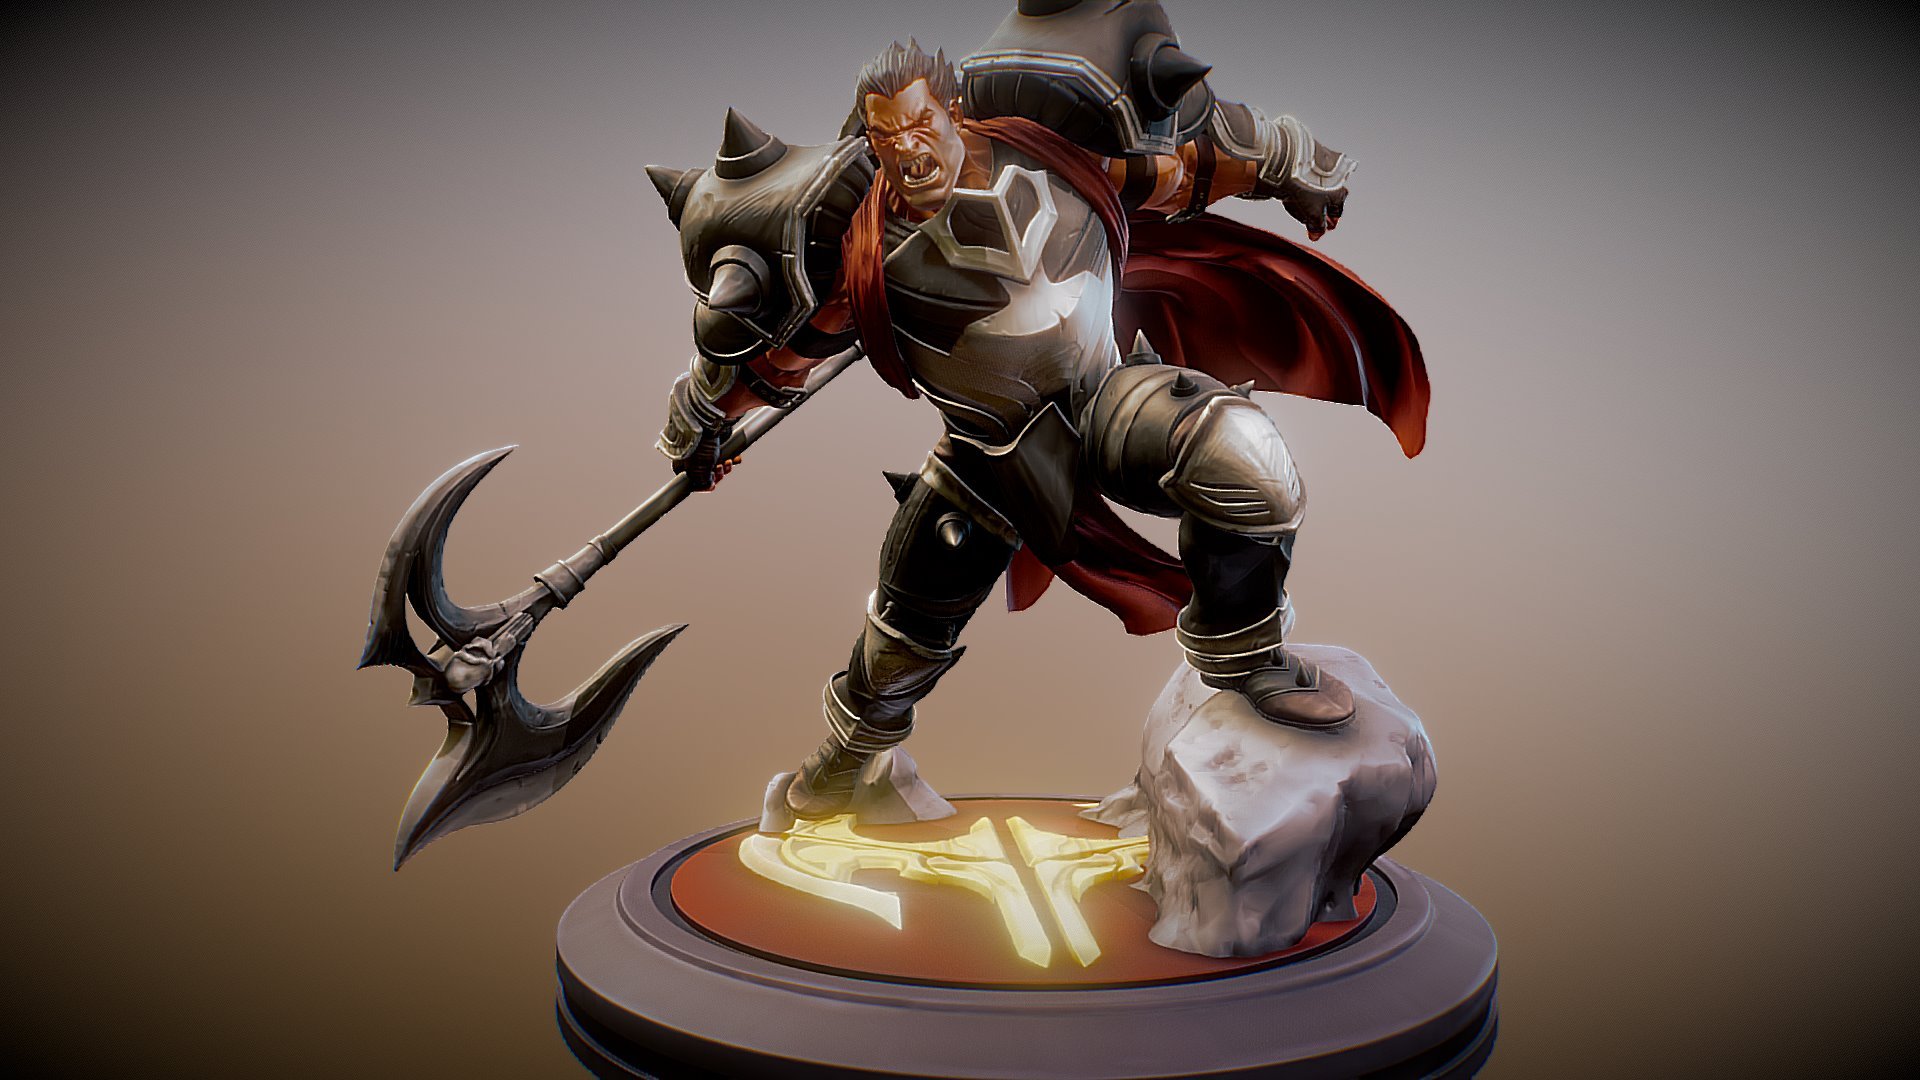 Here my Darius fanart, I hope this like to you.

Facebook: http://facebook.com/cgmakers Patreon: http://patreon.com/cgpyro - Darius Fanart - League of Legends - Buy Royalty Free 3D model by CG Makers (@cloud.cgmakers) 3d model